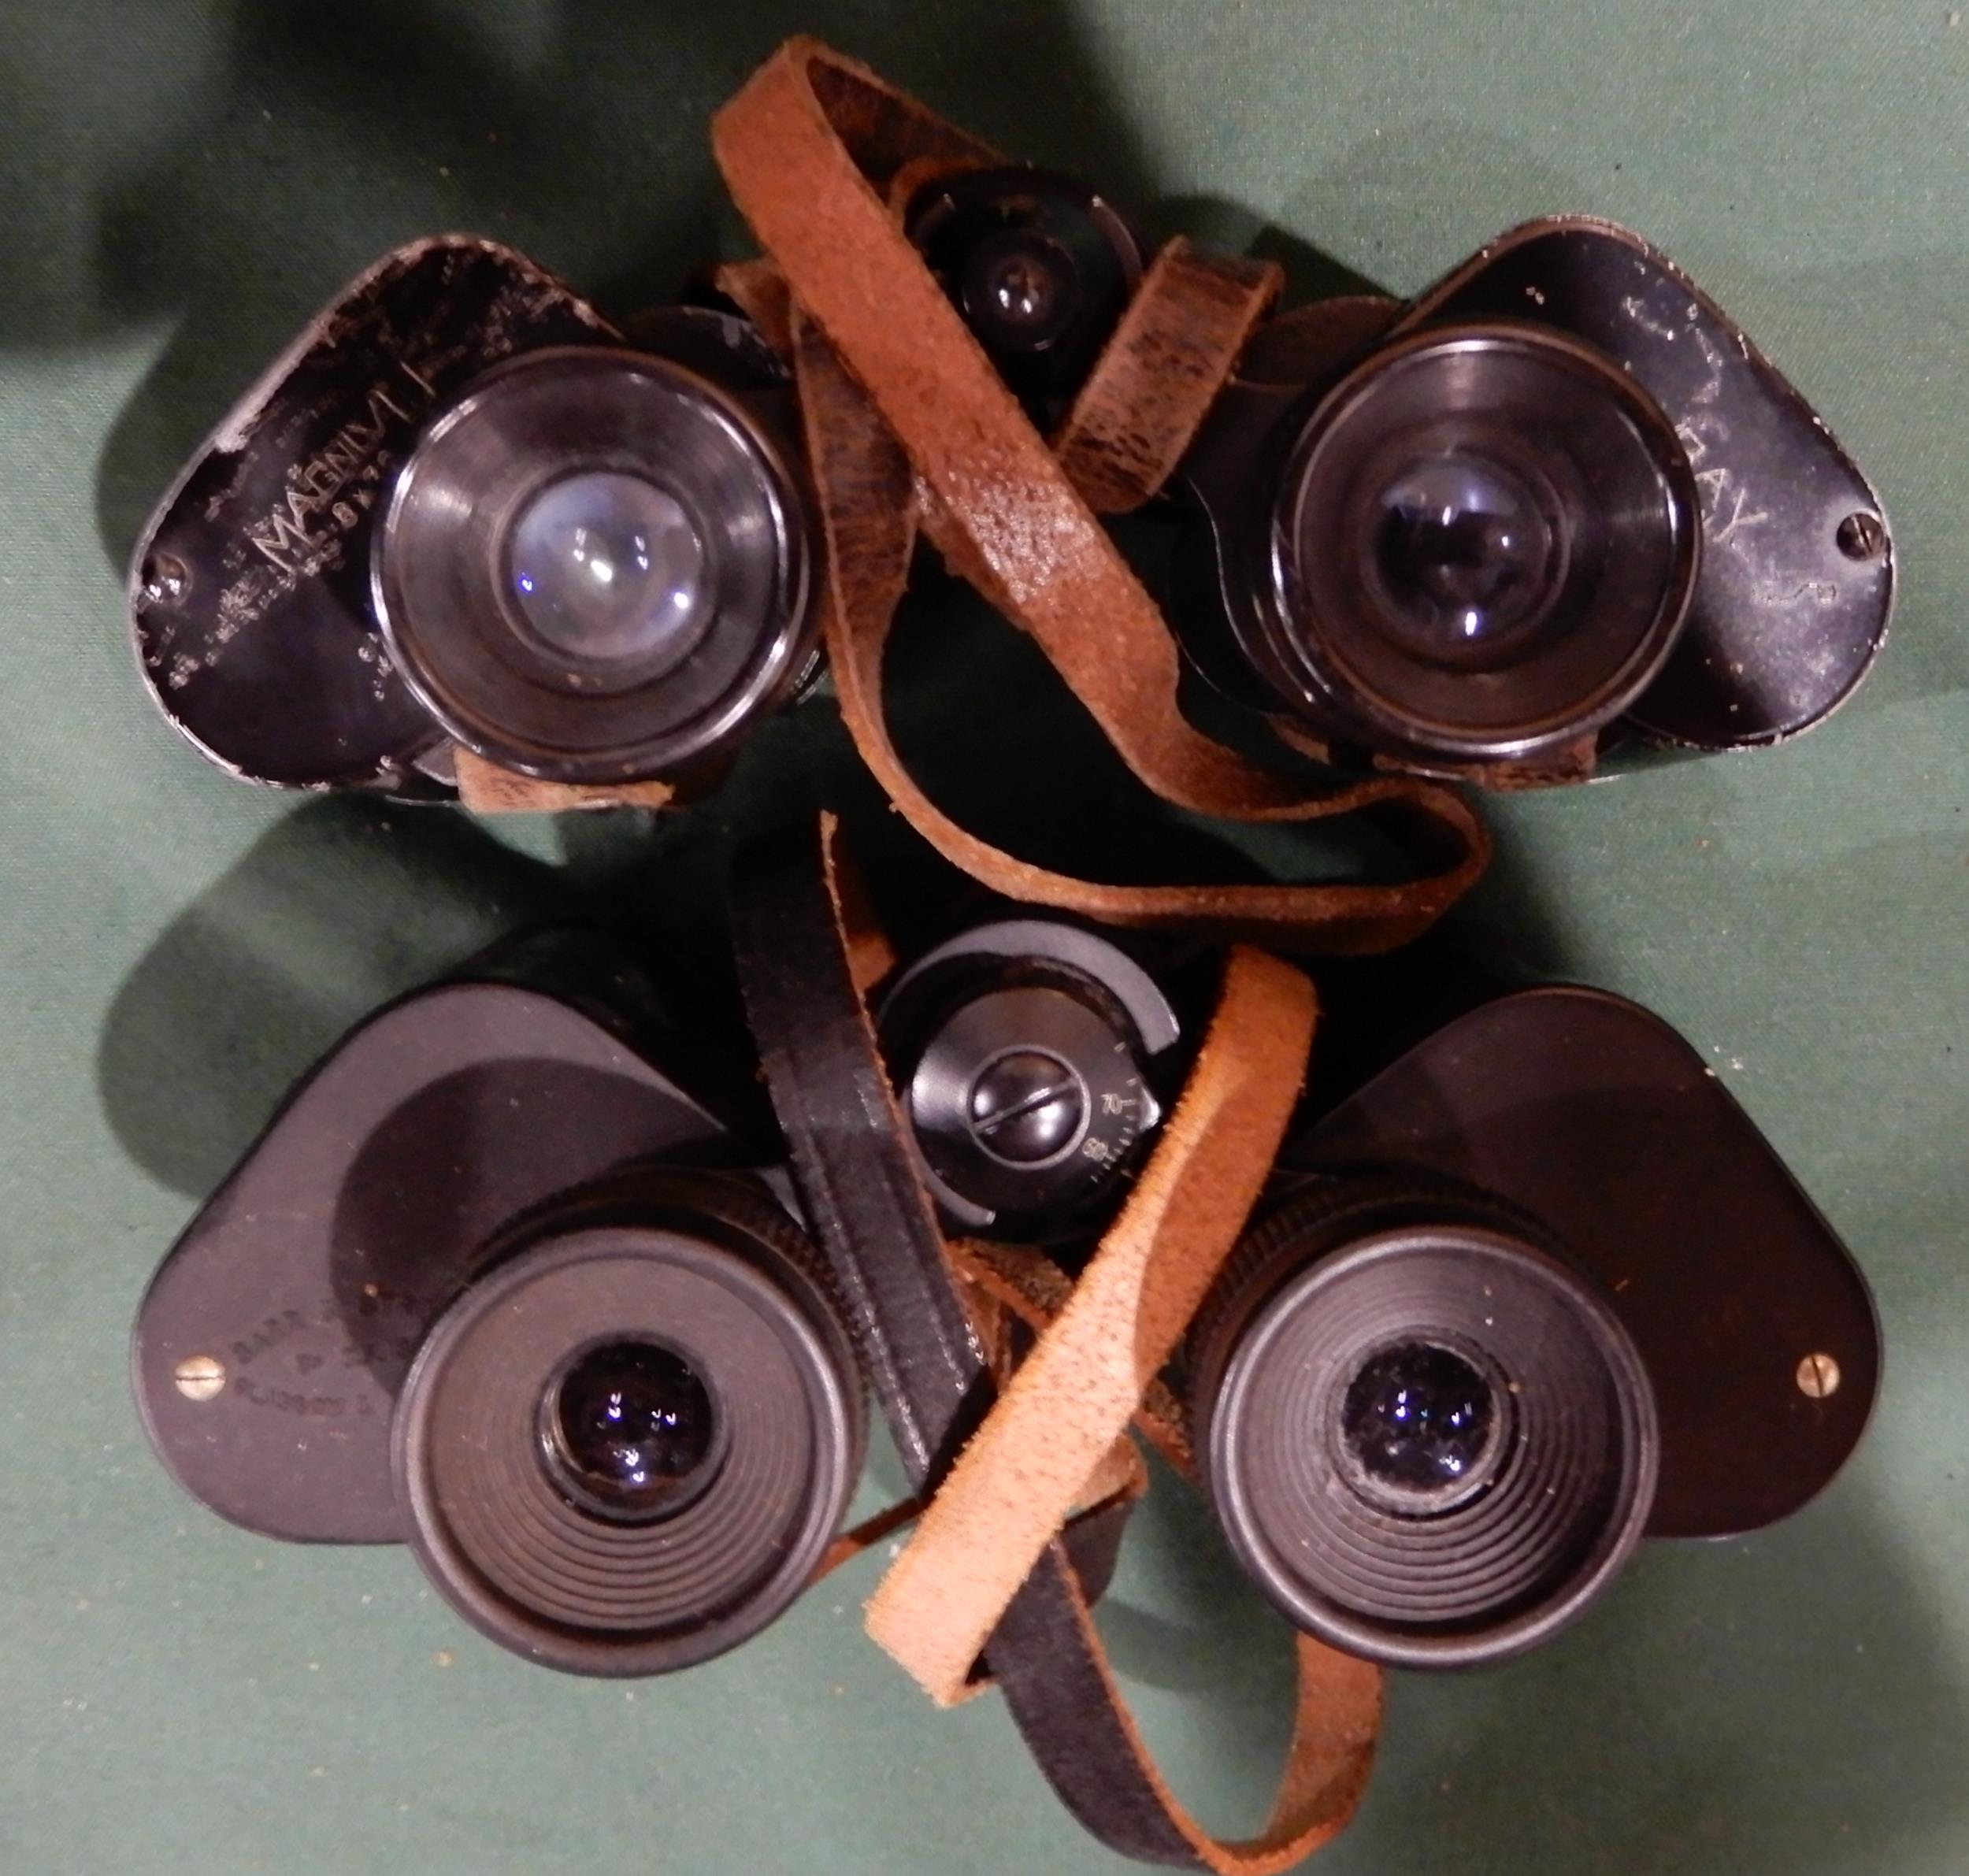 A quantity of binoculars with various makers and models with Nikon, Pentax, E. Leitz, Carl Zeiss, - Image 17 of 19